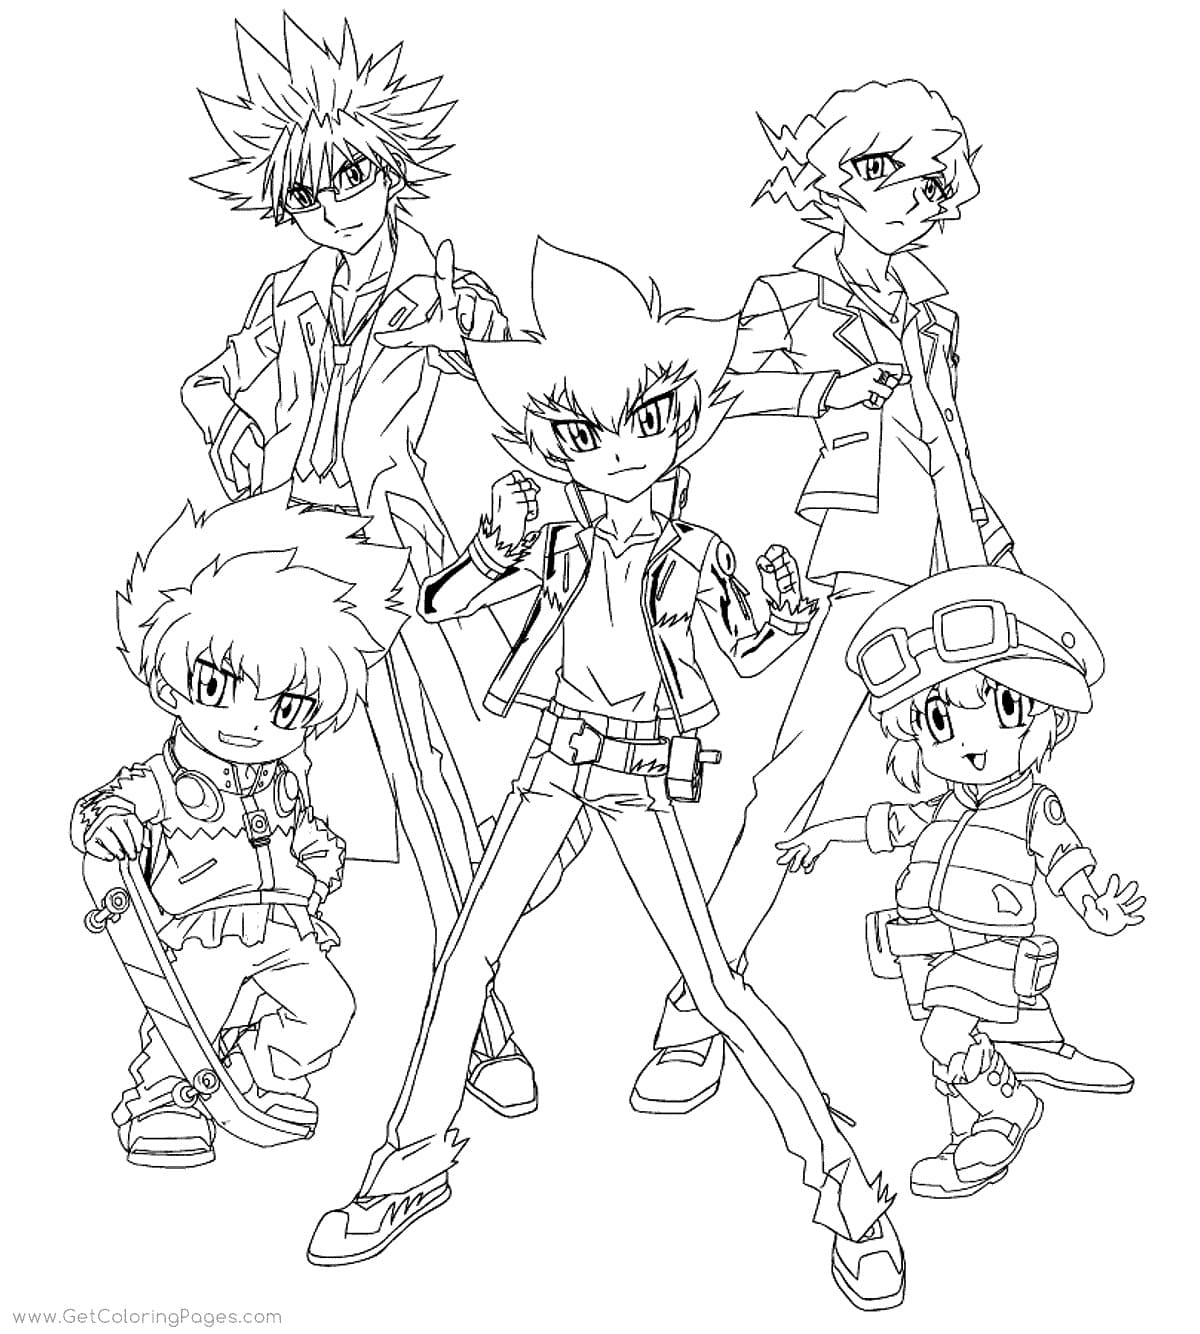 Beyblade Shogun Steel Coloring Page - Anime Coloring Pages